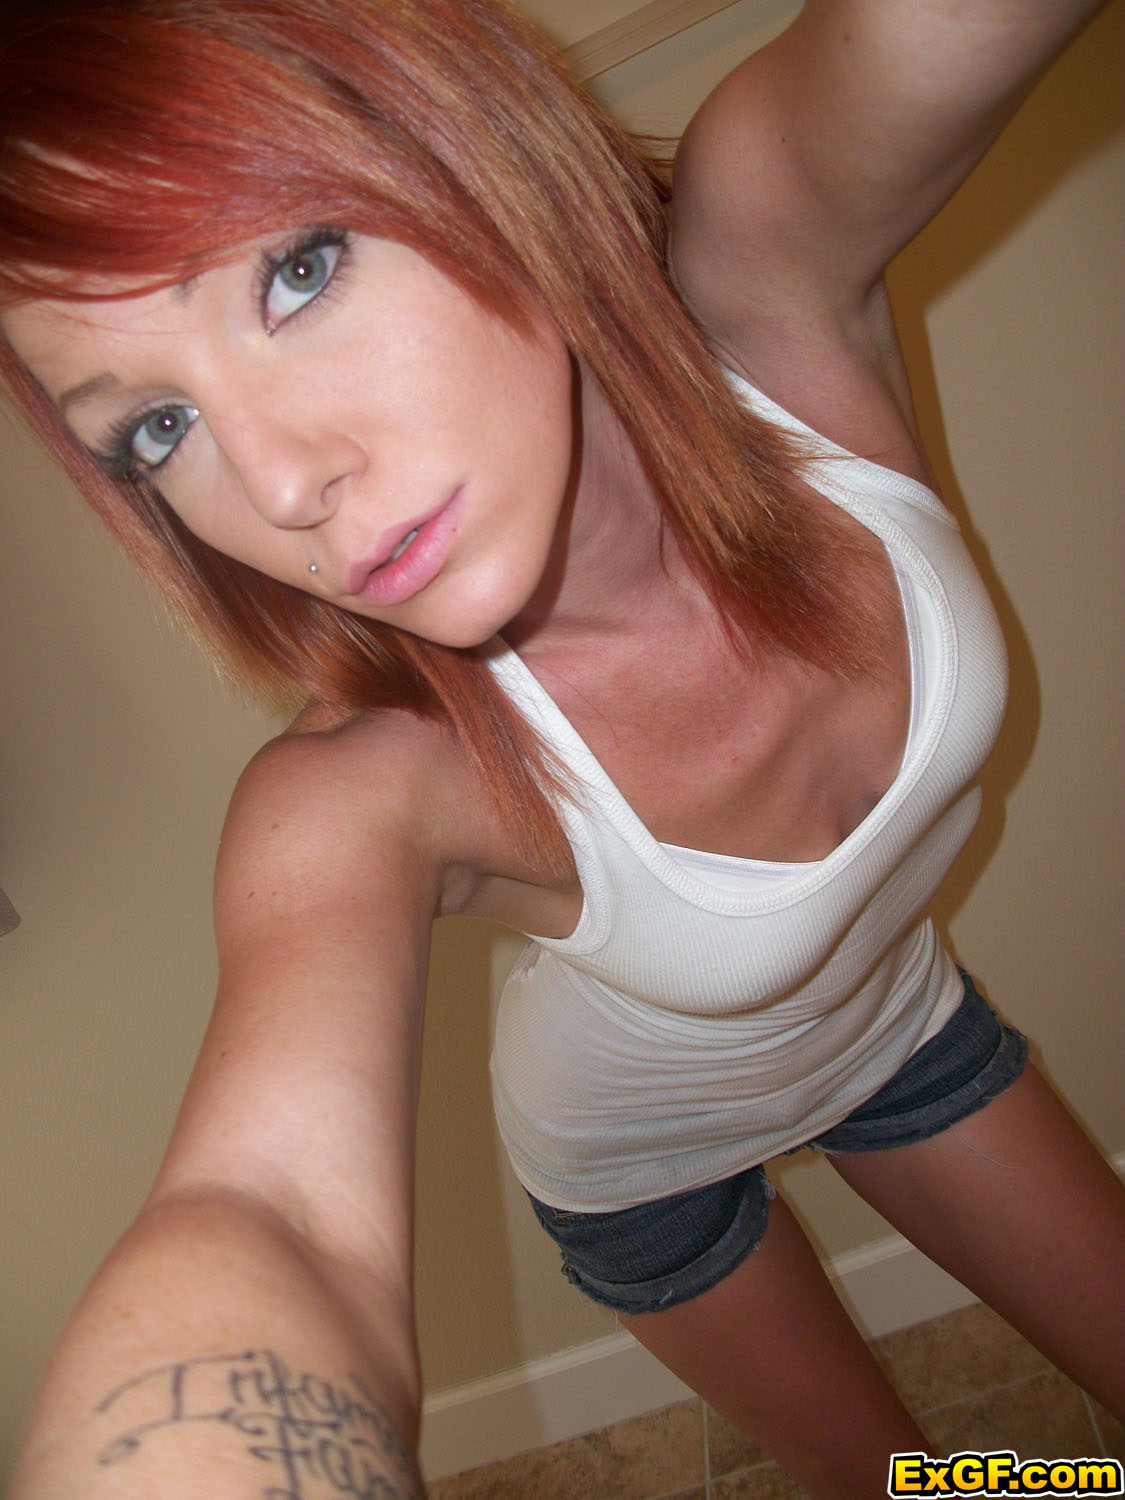 Sexy Redhaired Teen Posing Outdoors Indoors For the dirty Camera